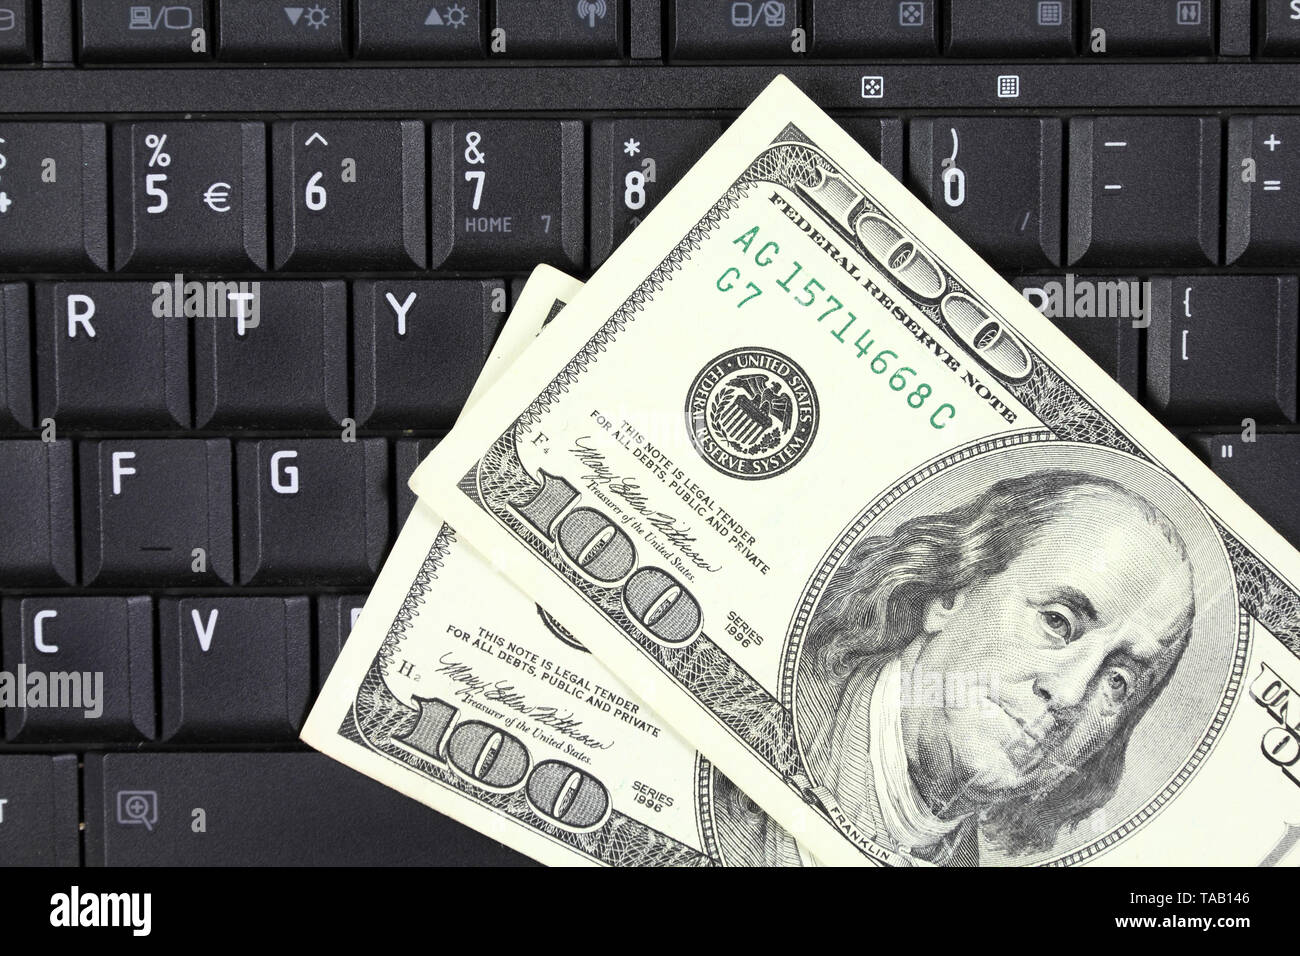 Online business - notebook keyboard and US 100 dollar bills Stock Photo